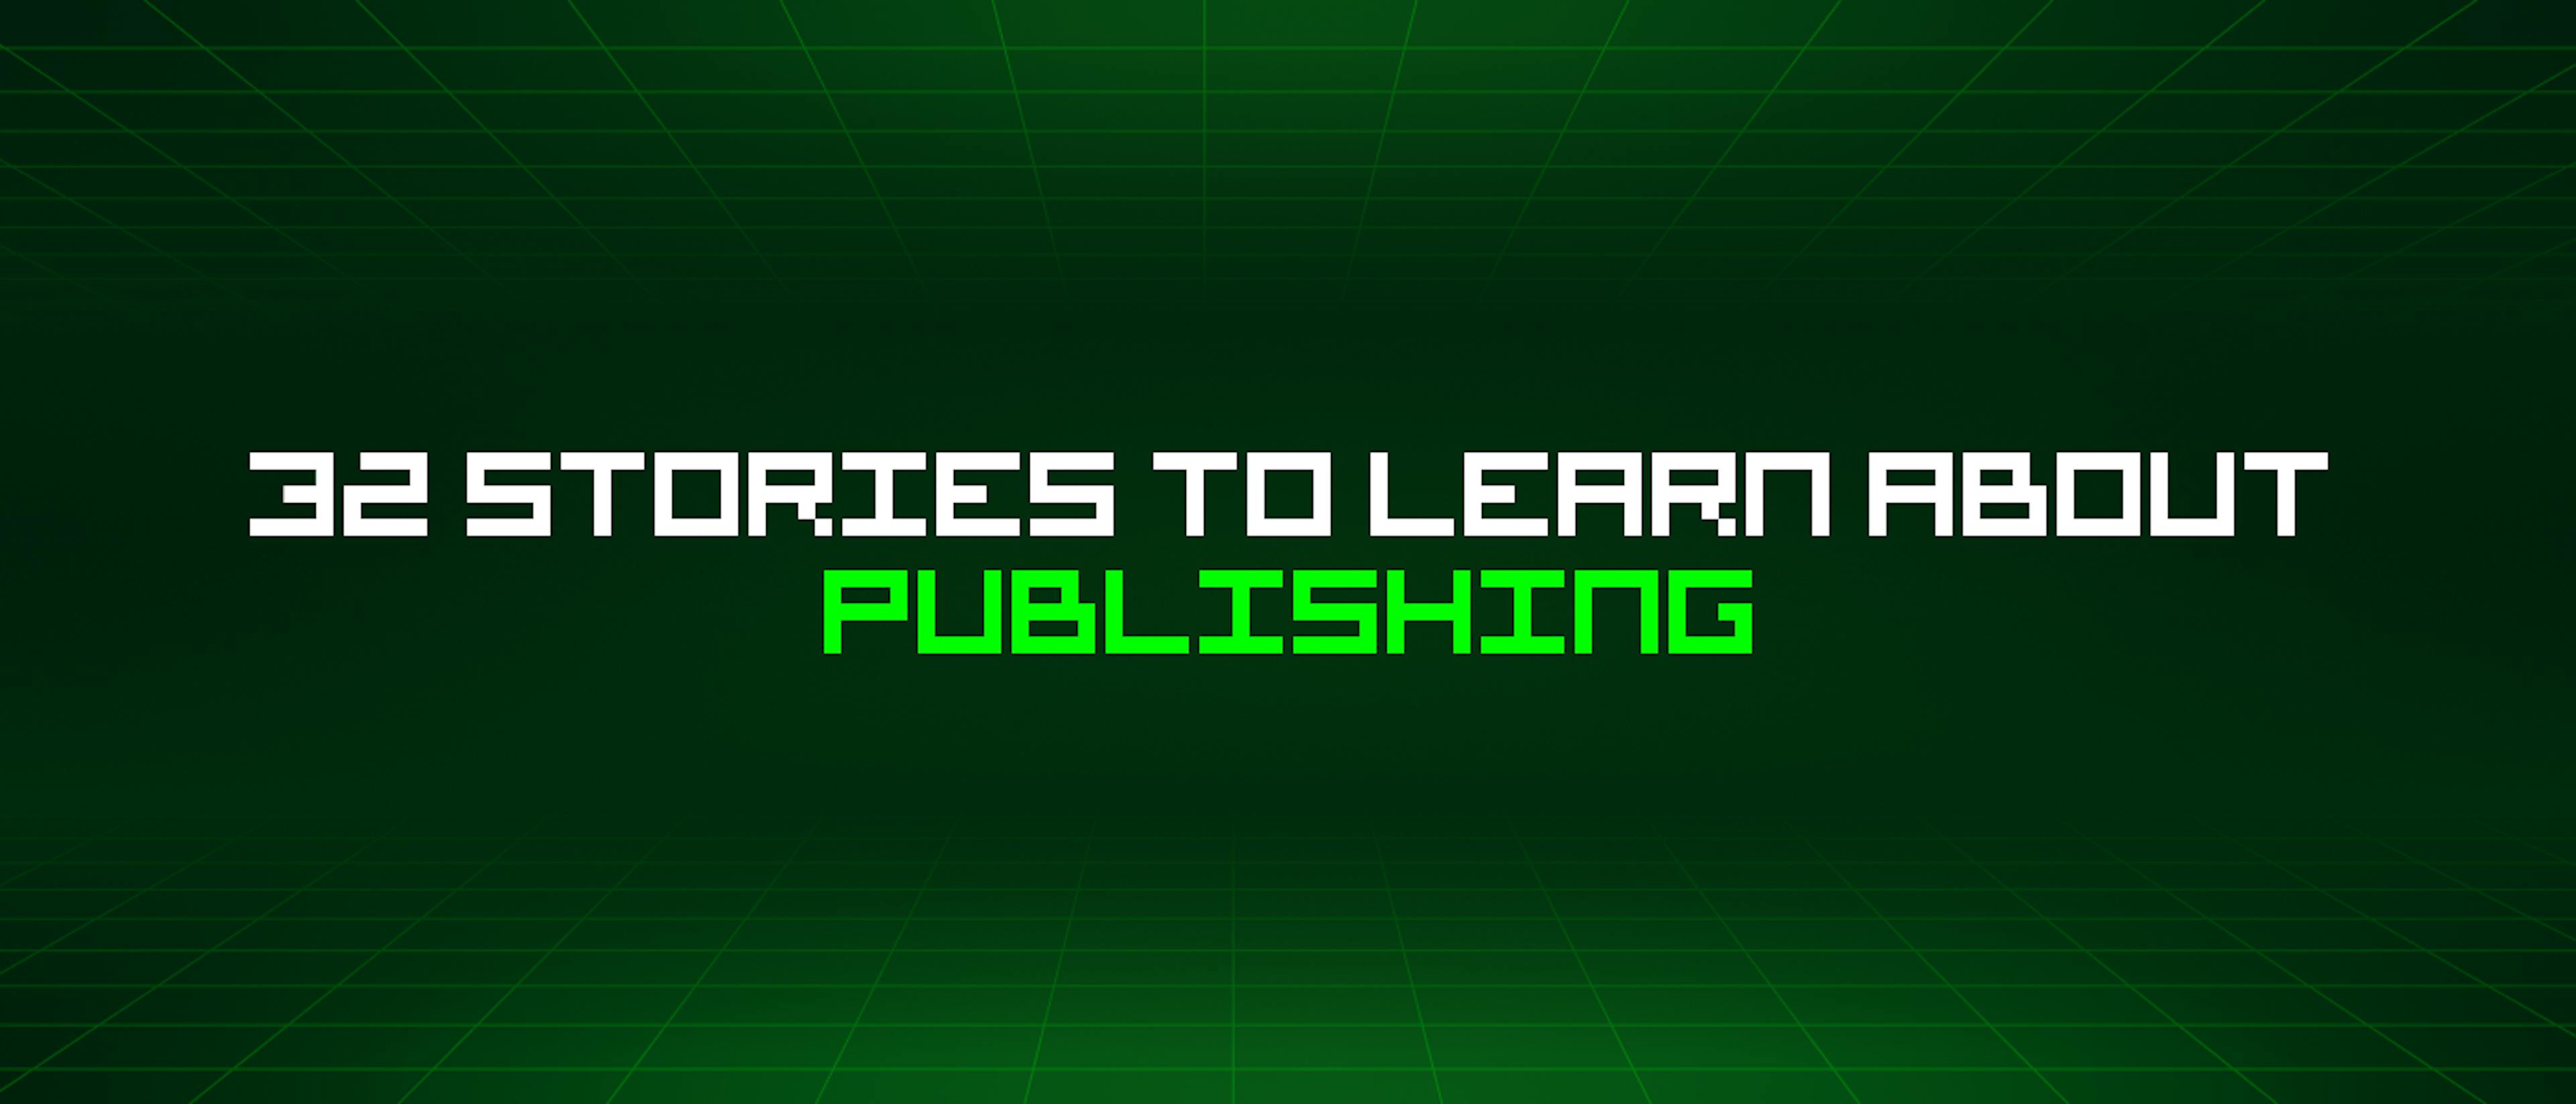 /32-stories-to-learn-about-publishing feature image